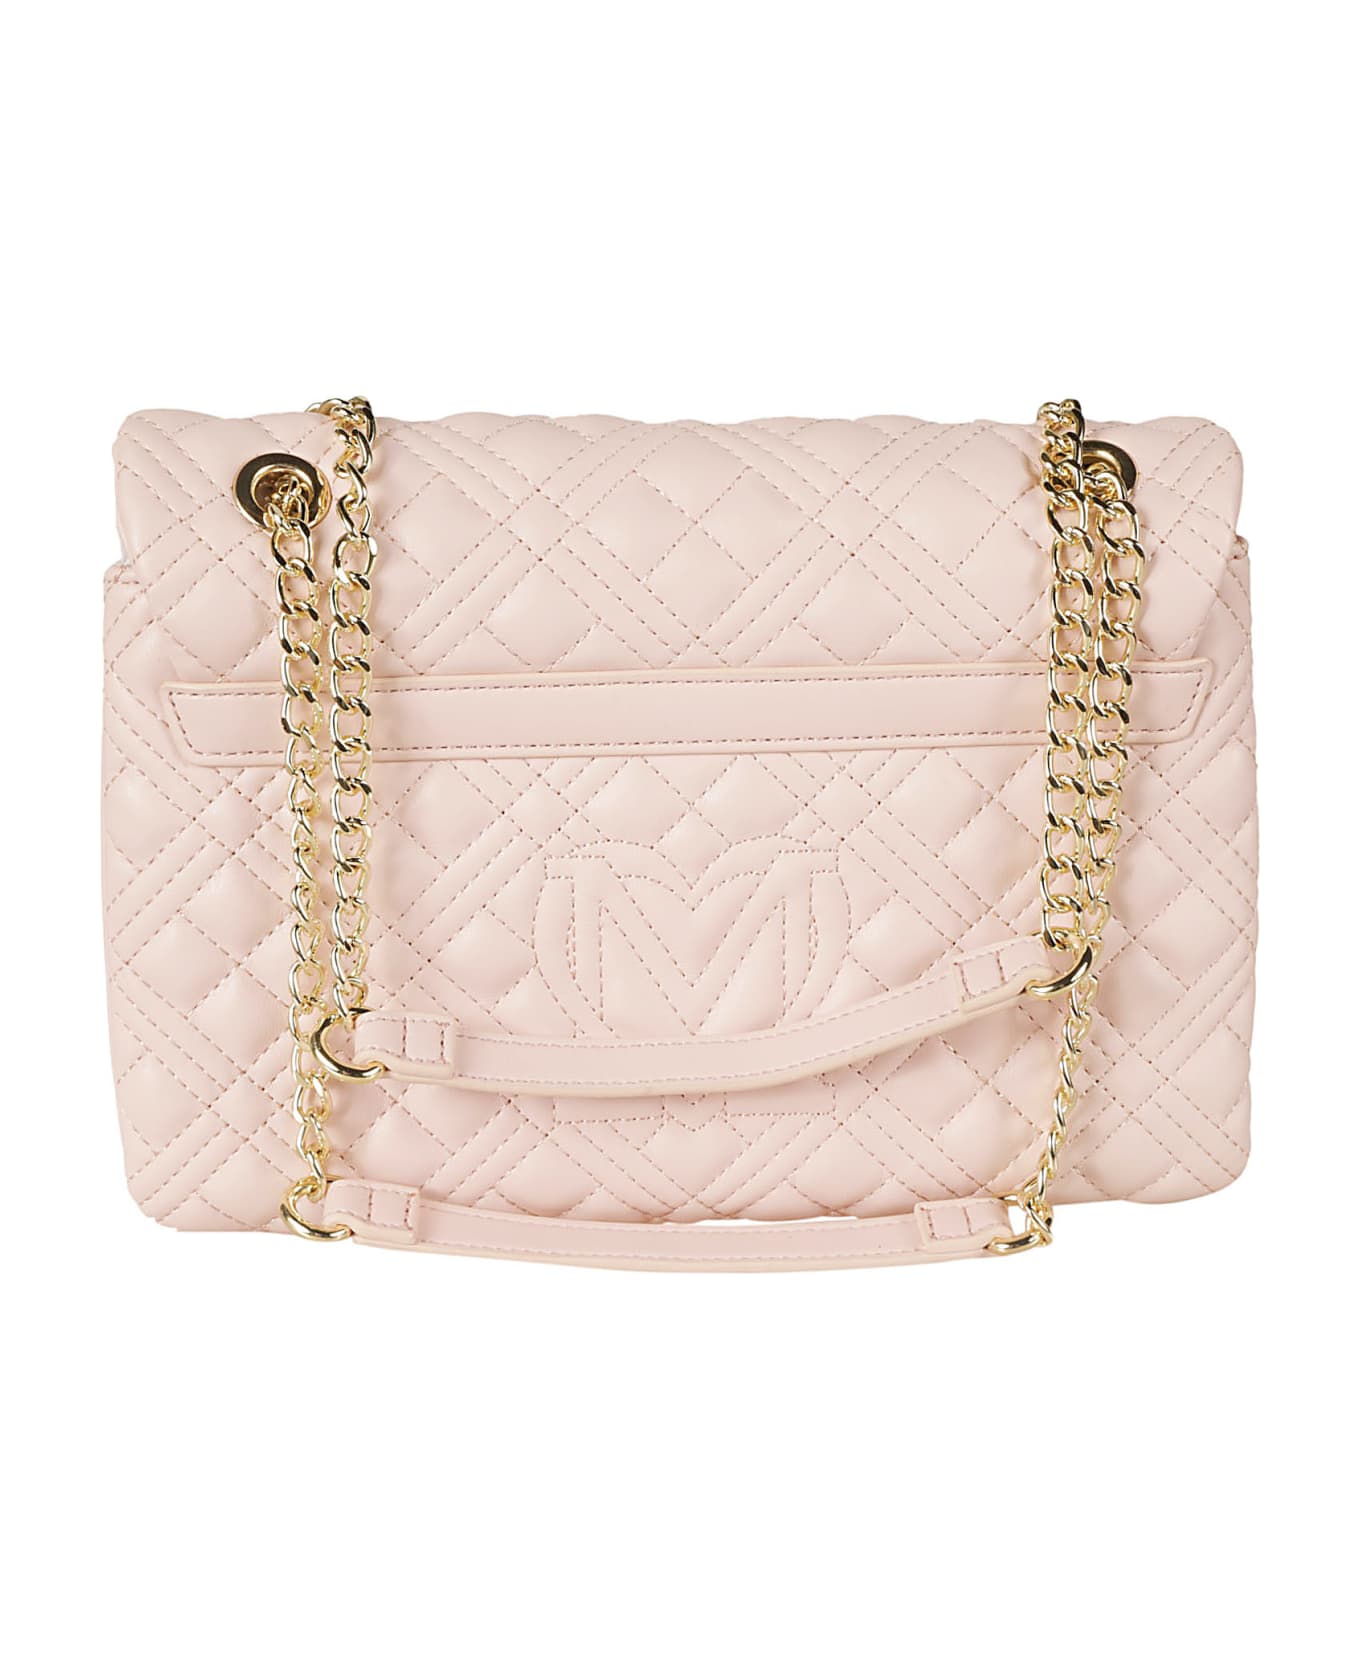 Love Moschino Logo Embossed Quilted Chain Shoulder Bag - Cipria ショルダーバッグ